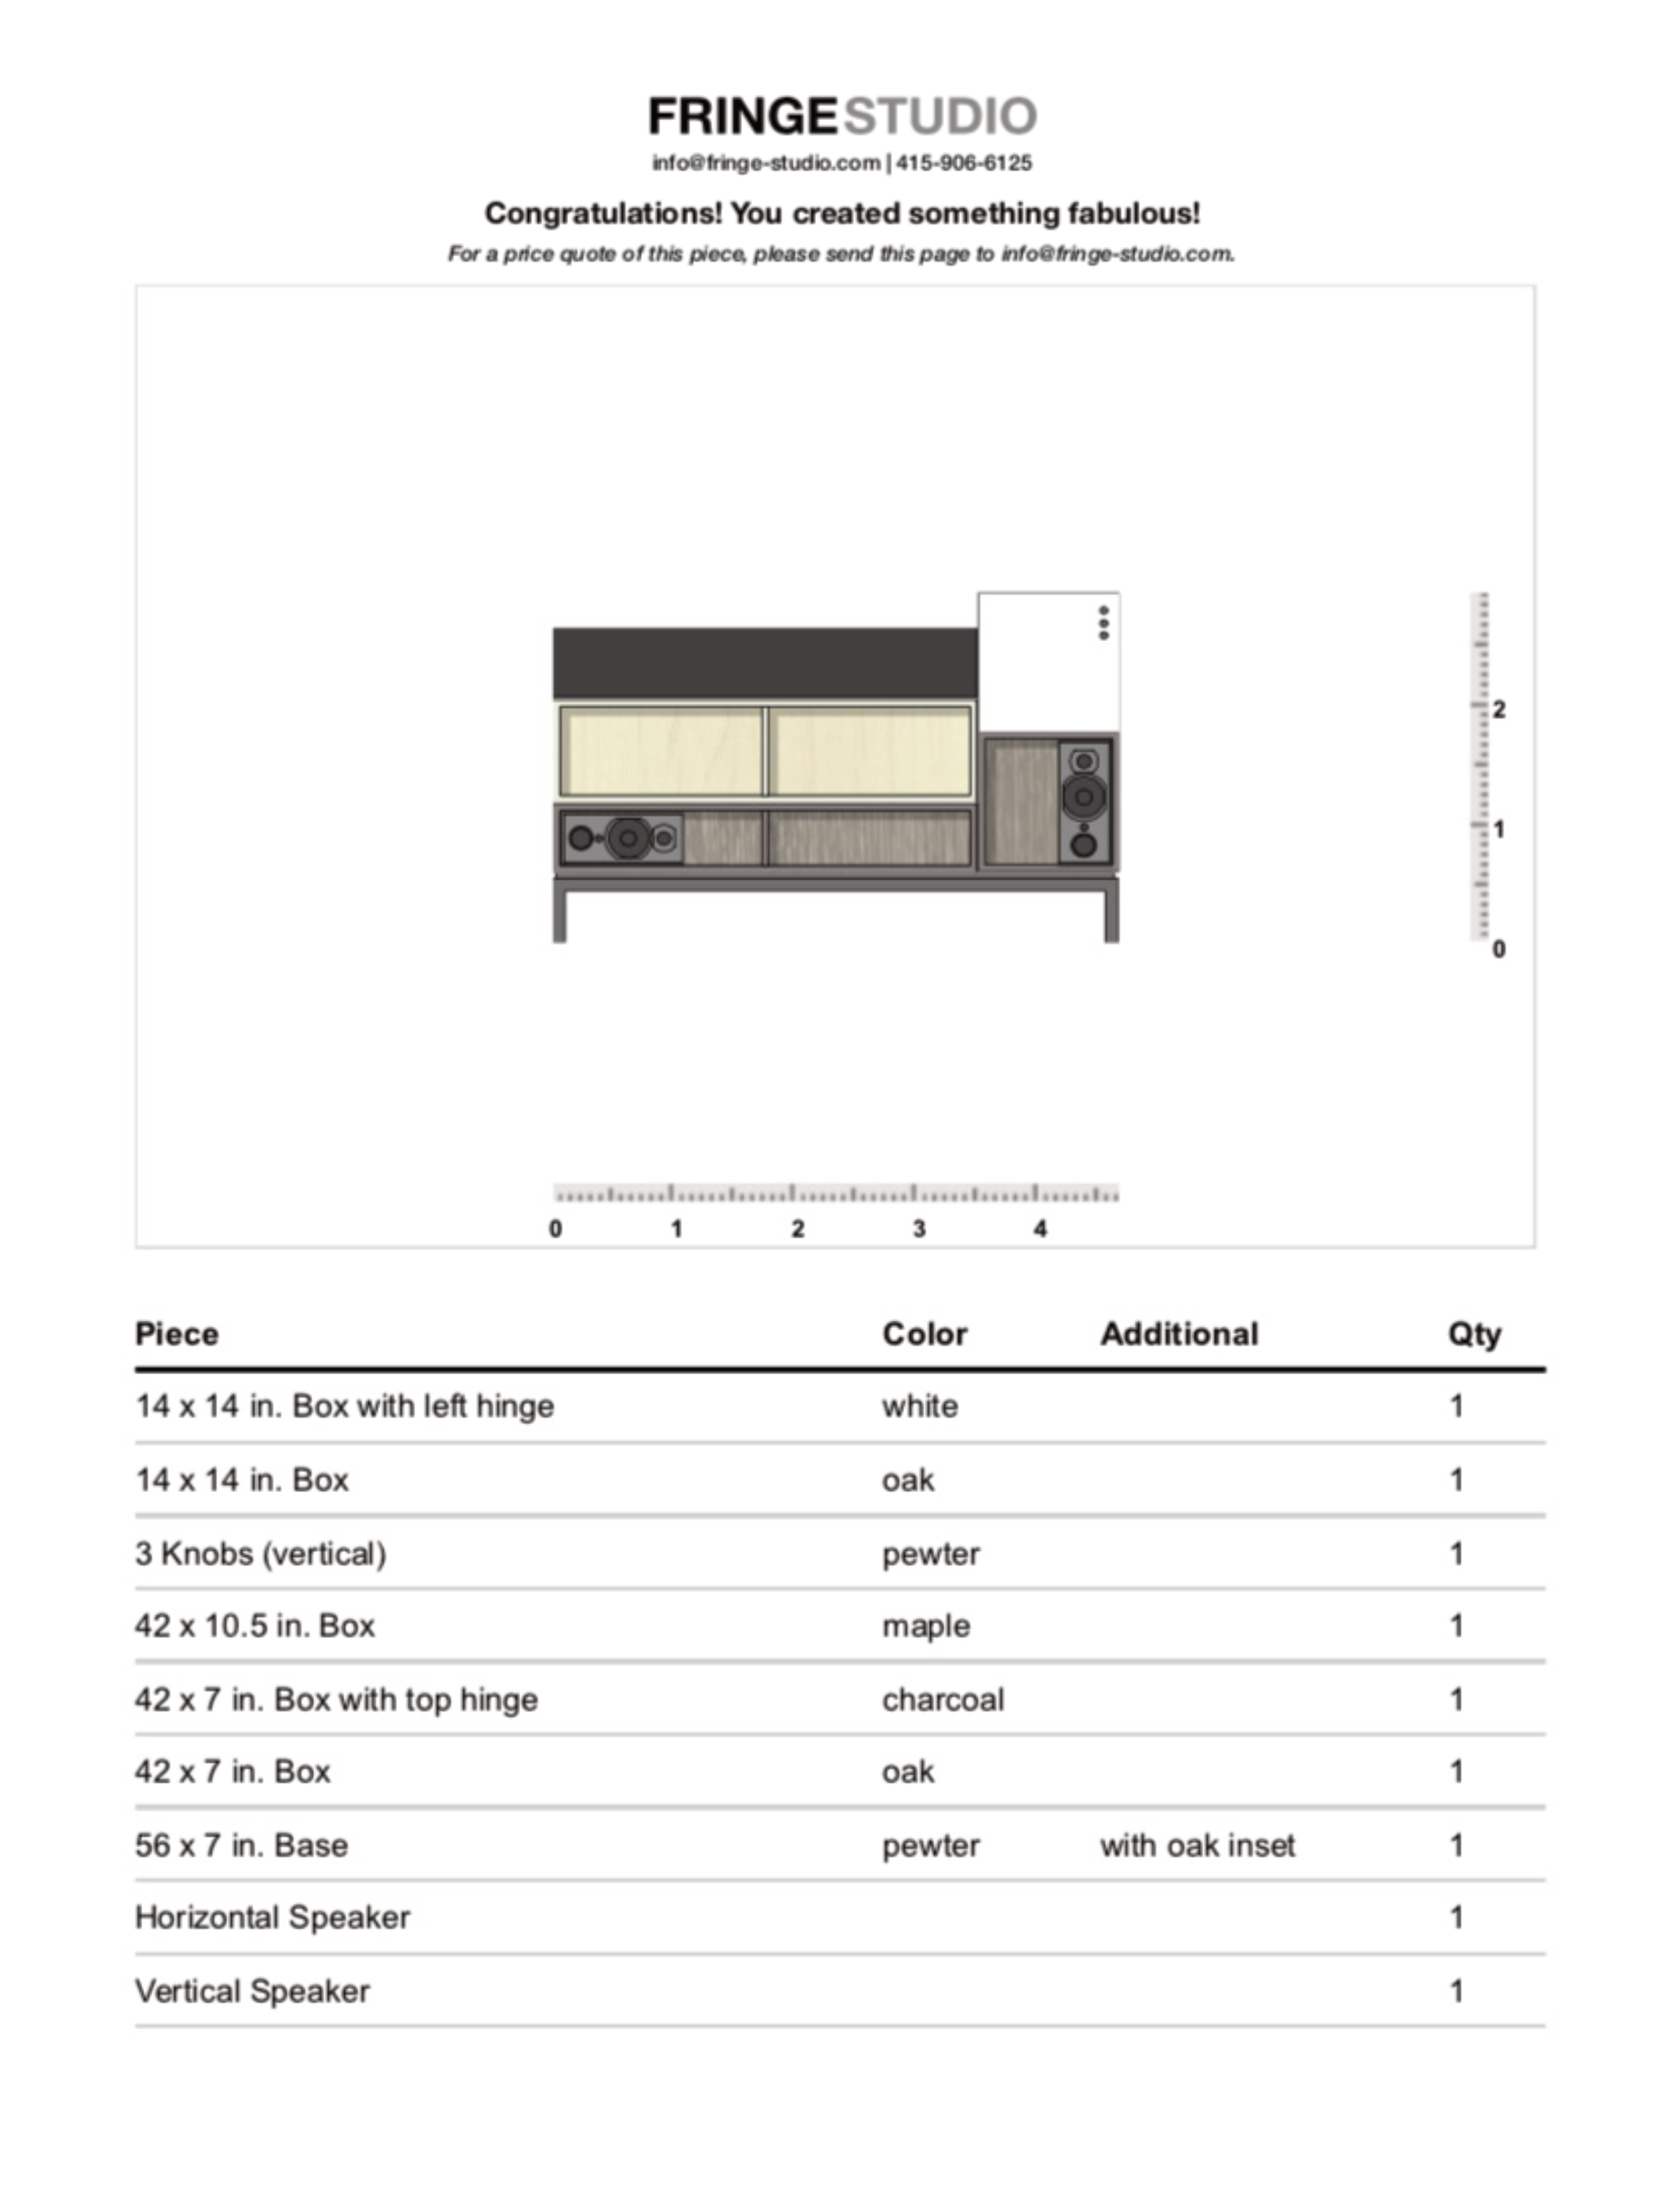 Printable build sheet generated by the application